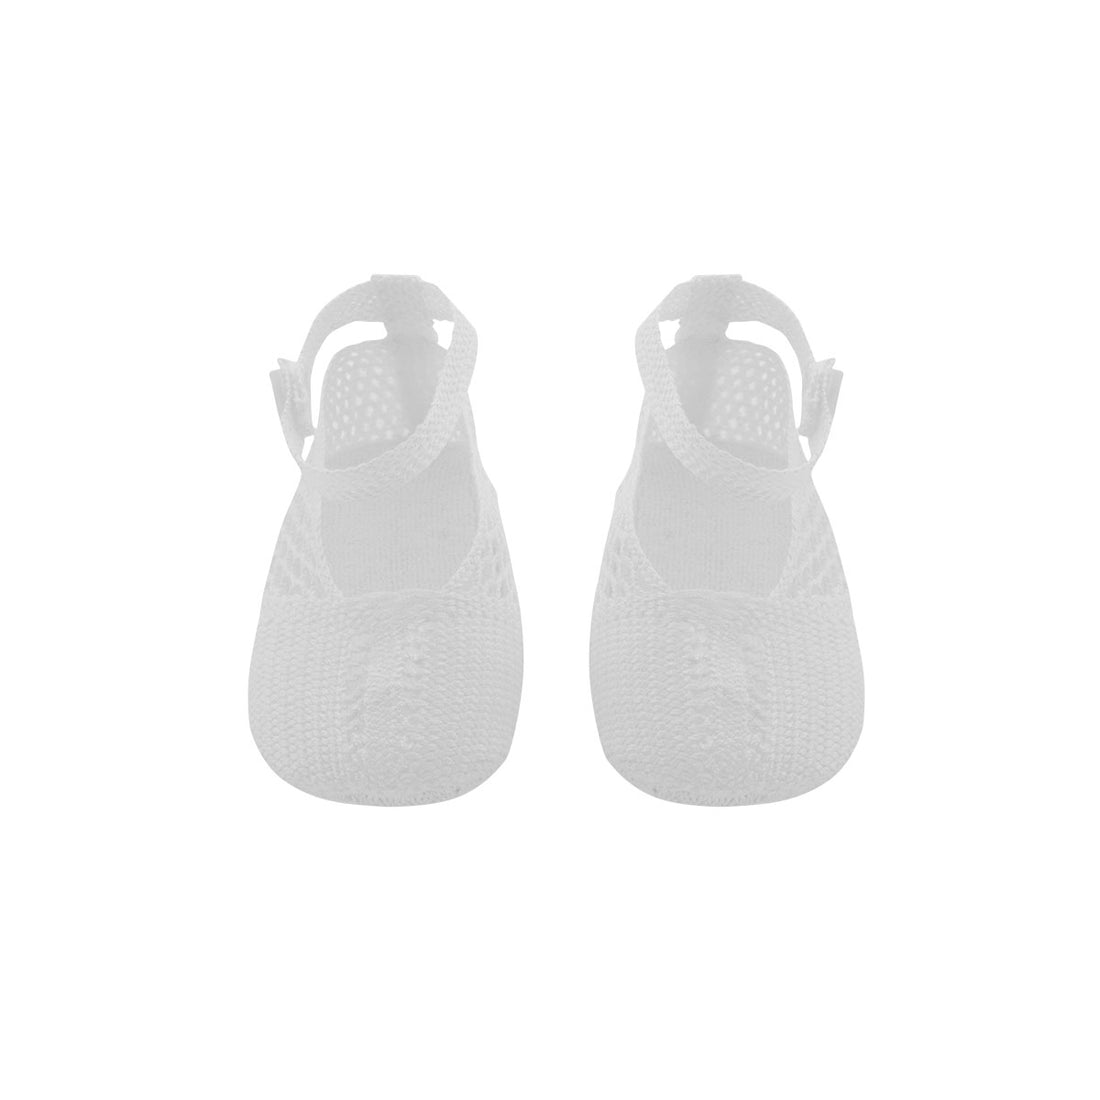 r&j-cambrass-sa-summer-baby-shoes-166-white- (2)